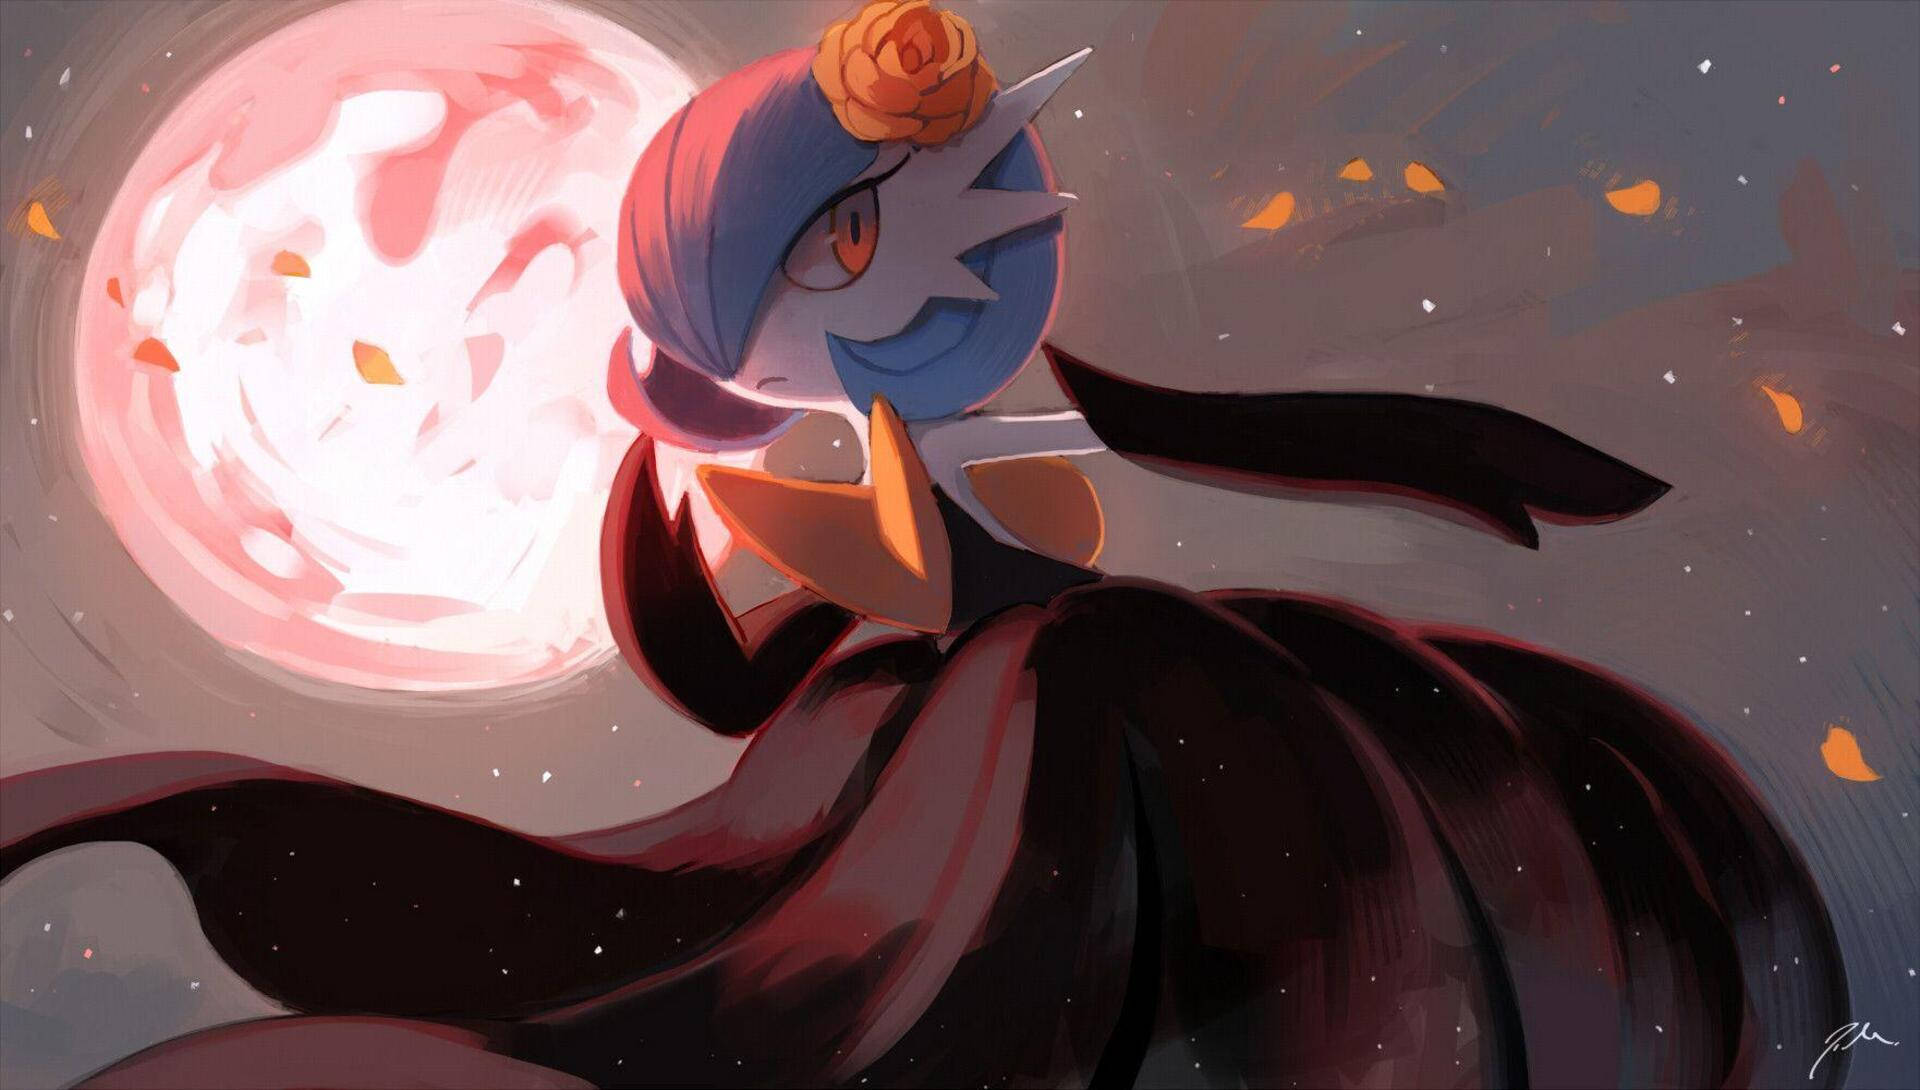 Download Nature of the Beast - Embrace the Power of Mega Gardevoir